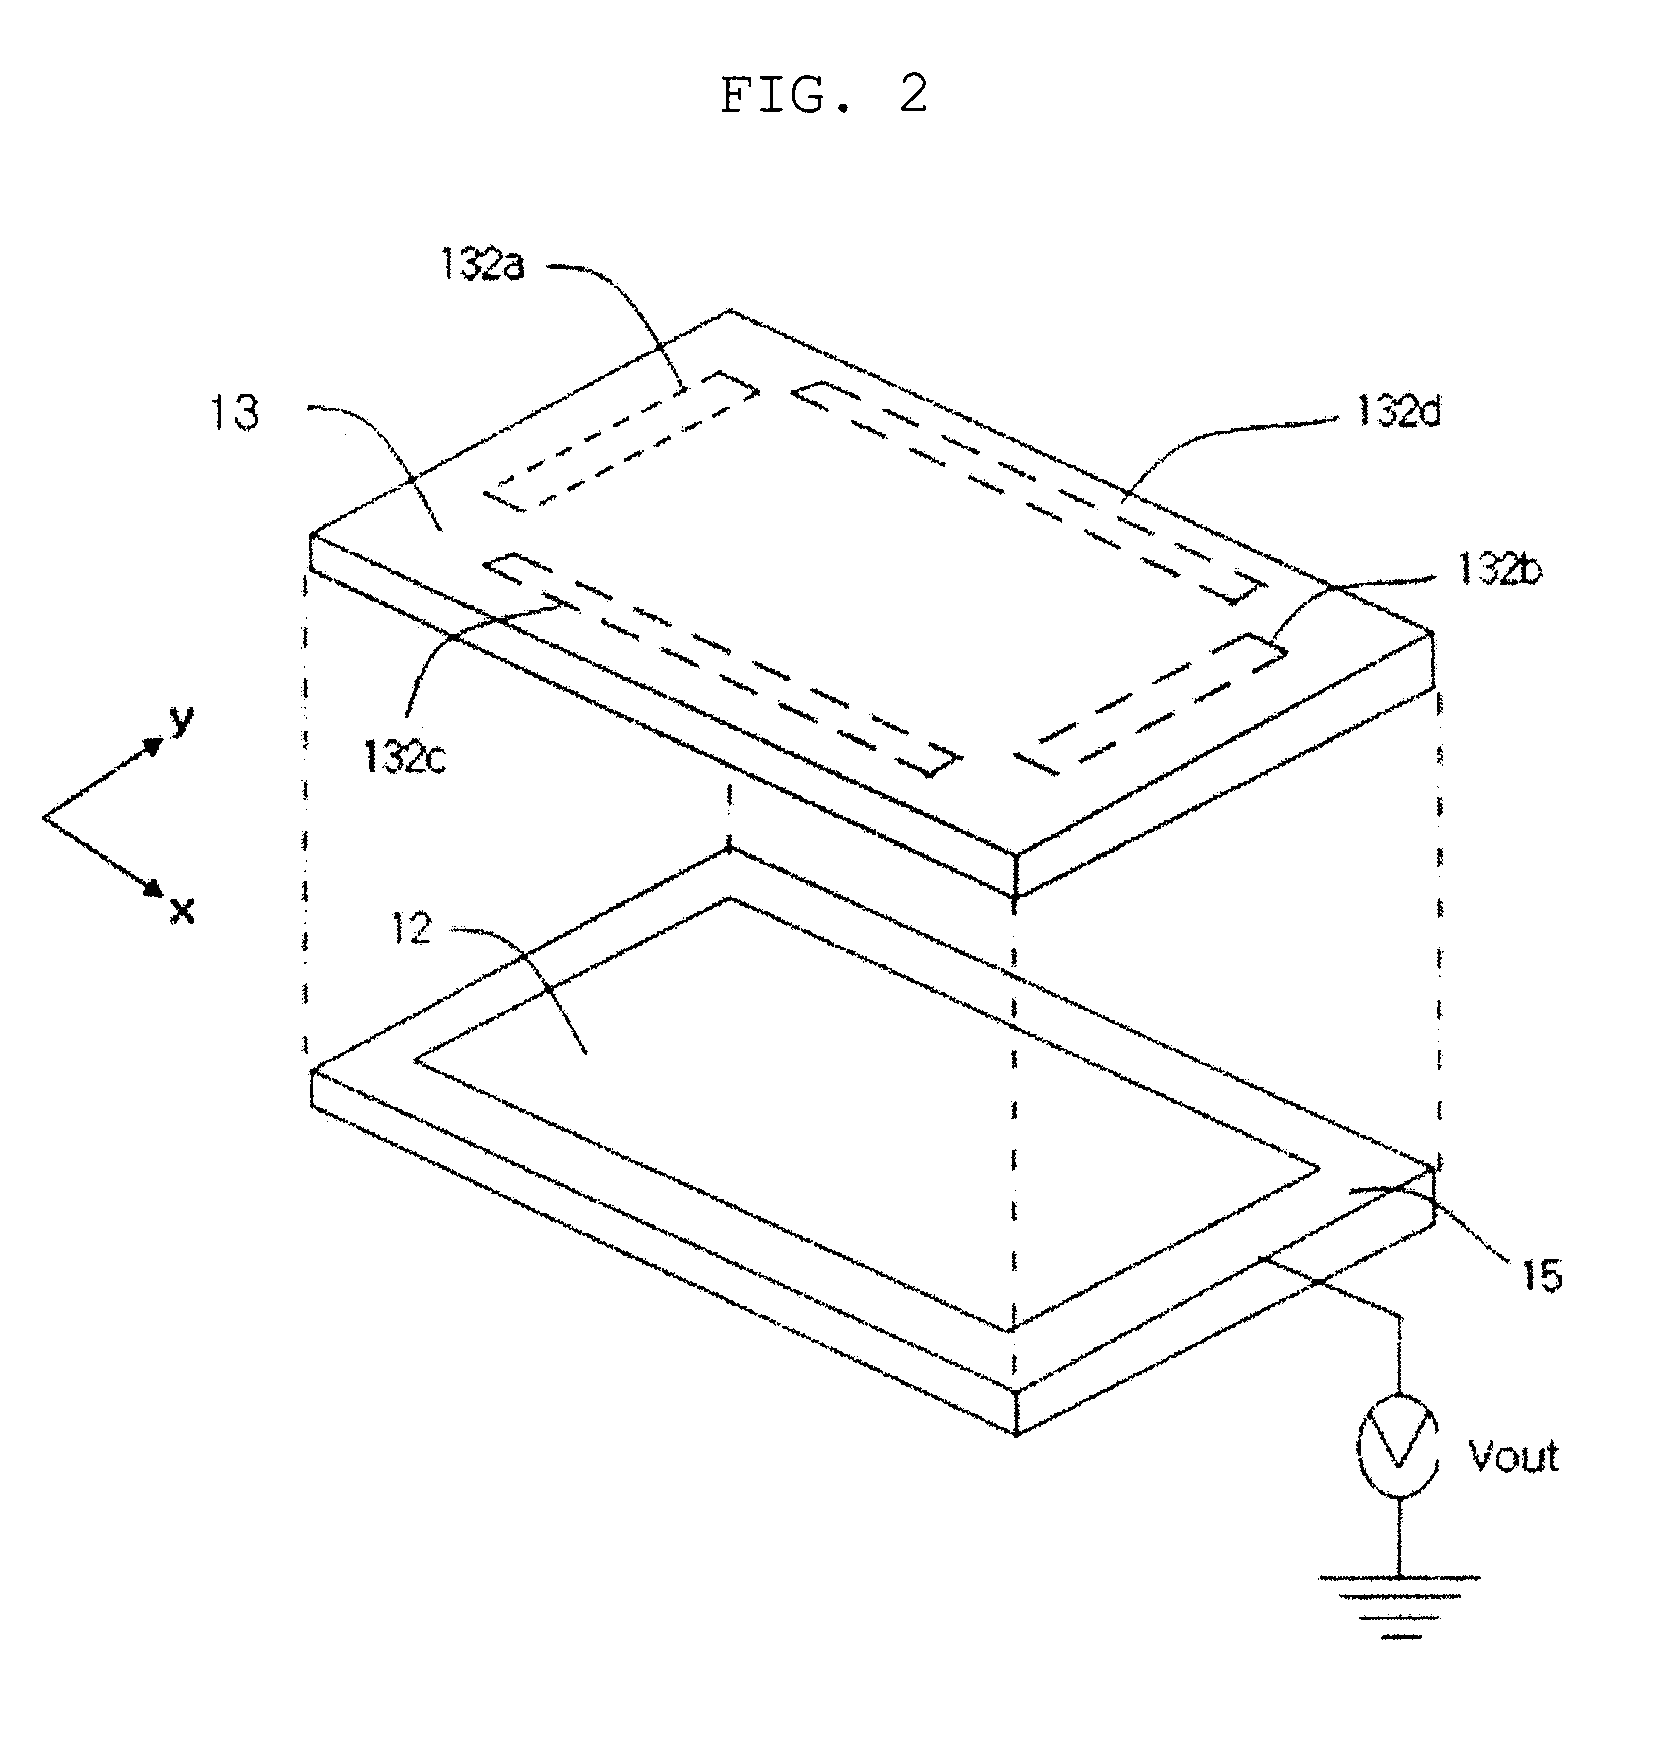 Display filter having touch input function